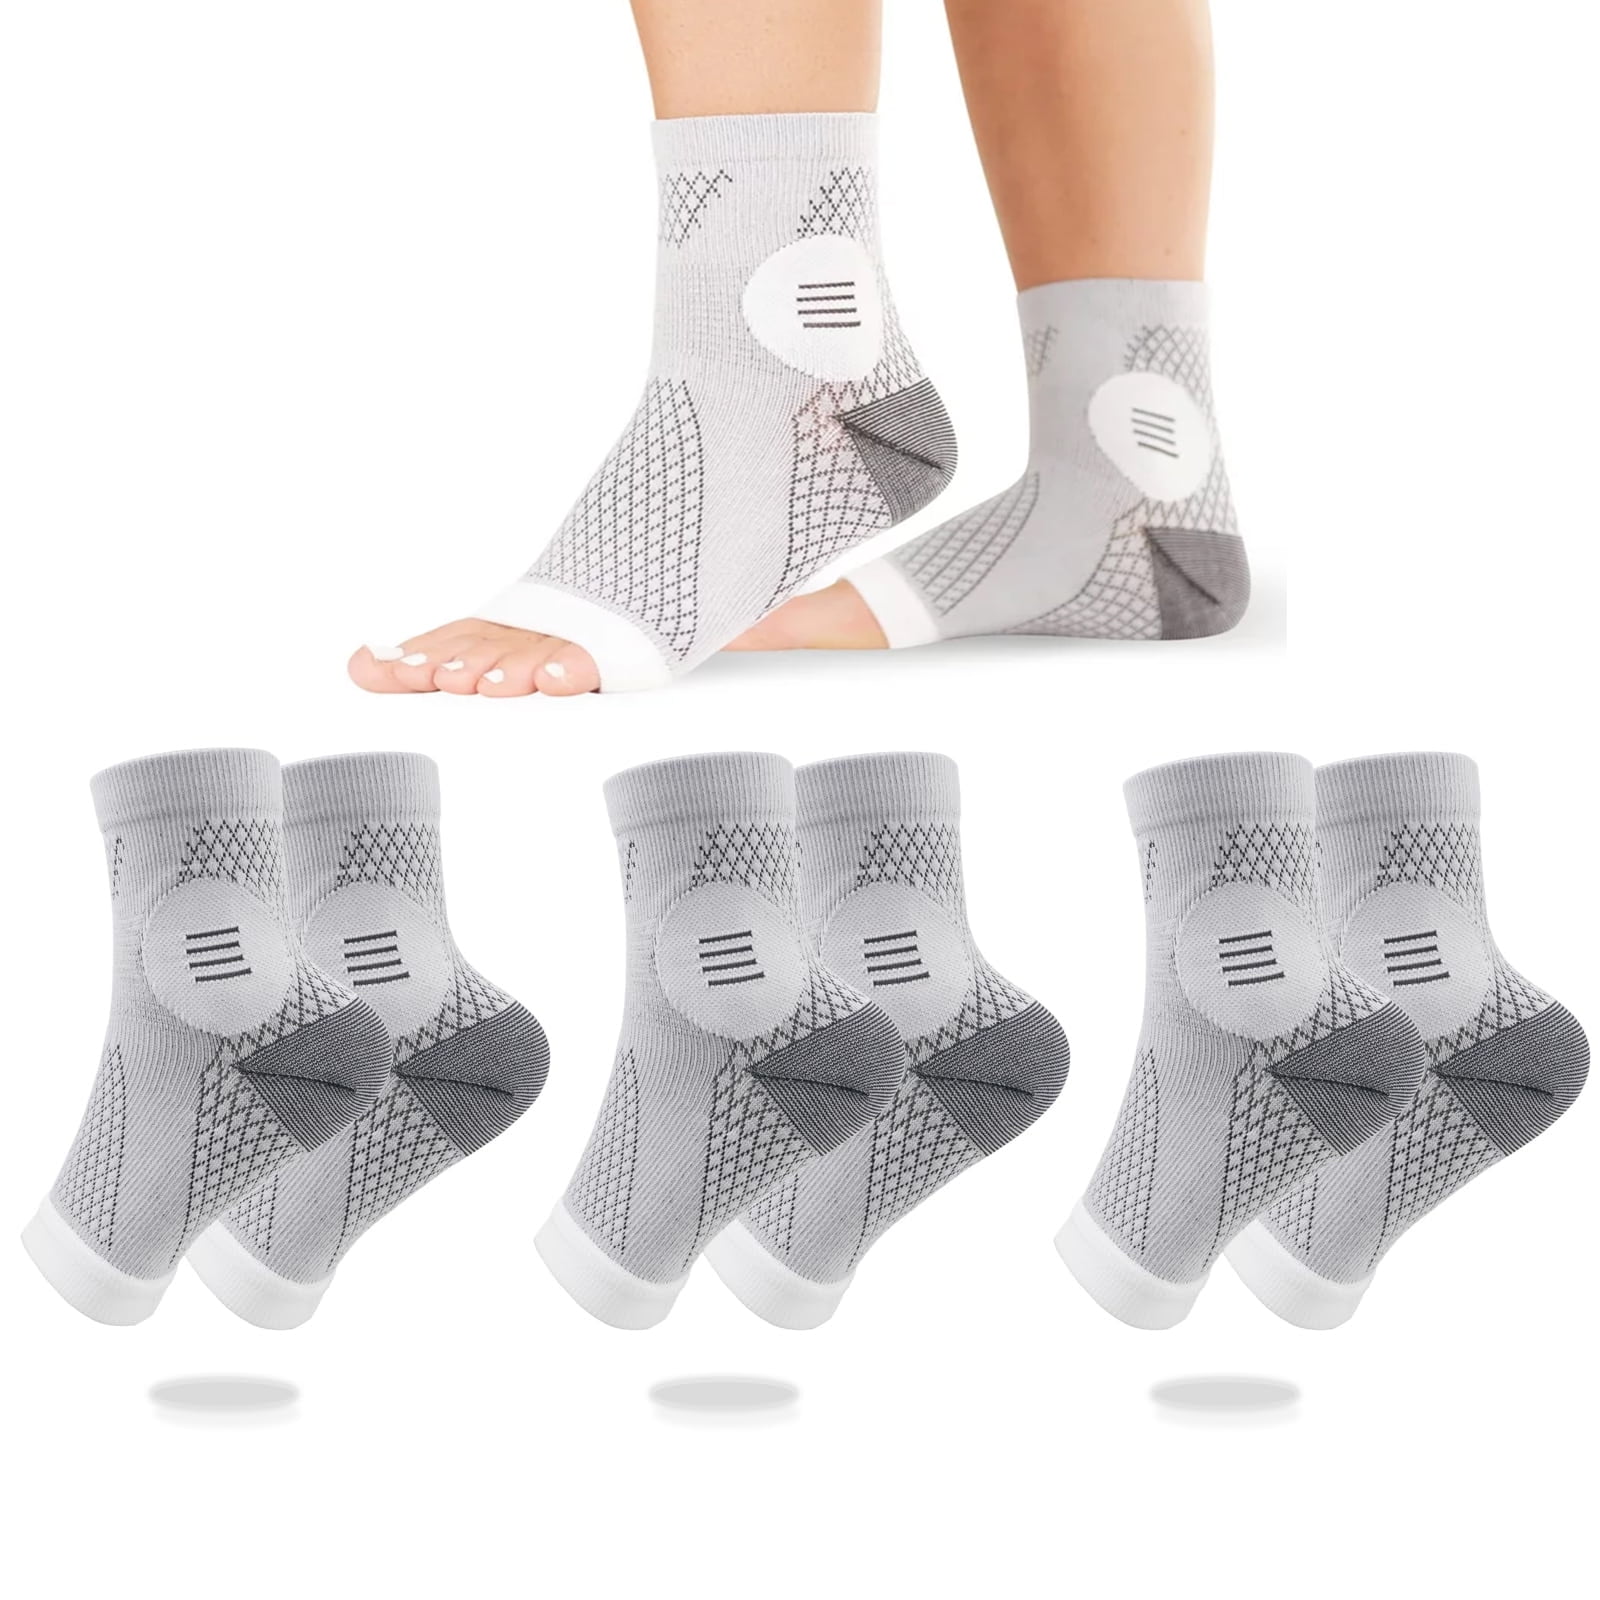 Rymora Ankle Compression Sleeve, Orthopedic Brace for Men & Women, Plantar  Fasciitis Socks for Circulation - White, Large - Neuropathy, Arch Support